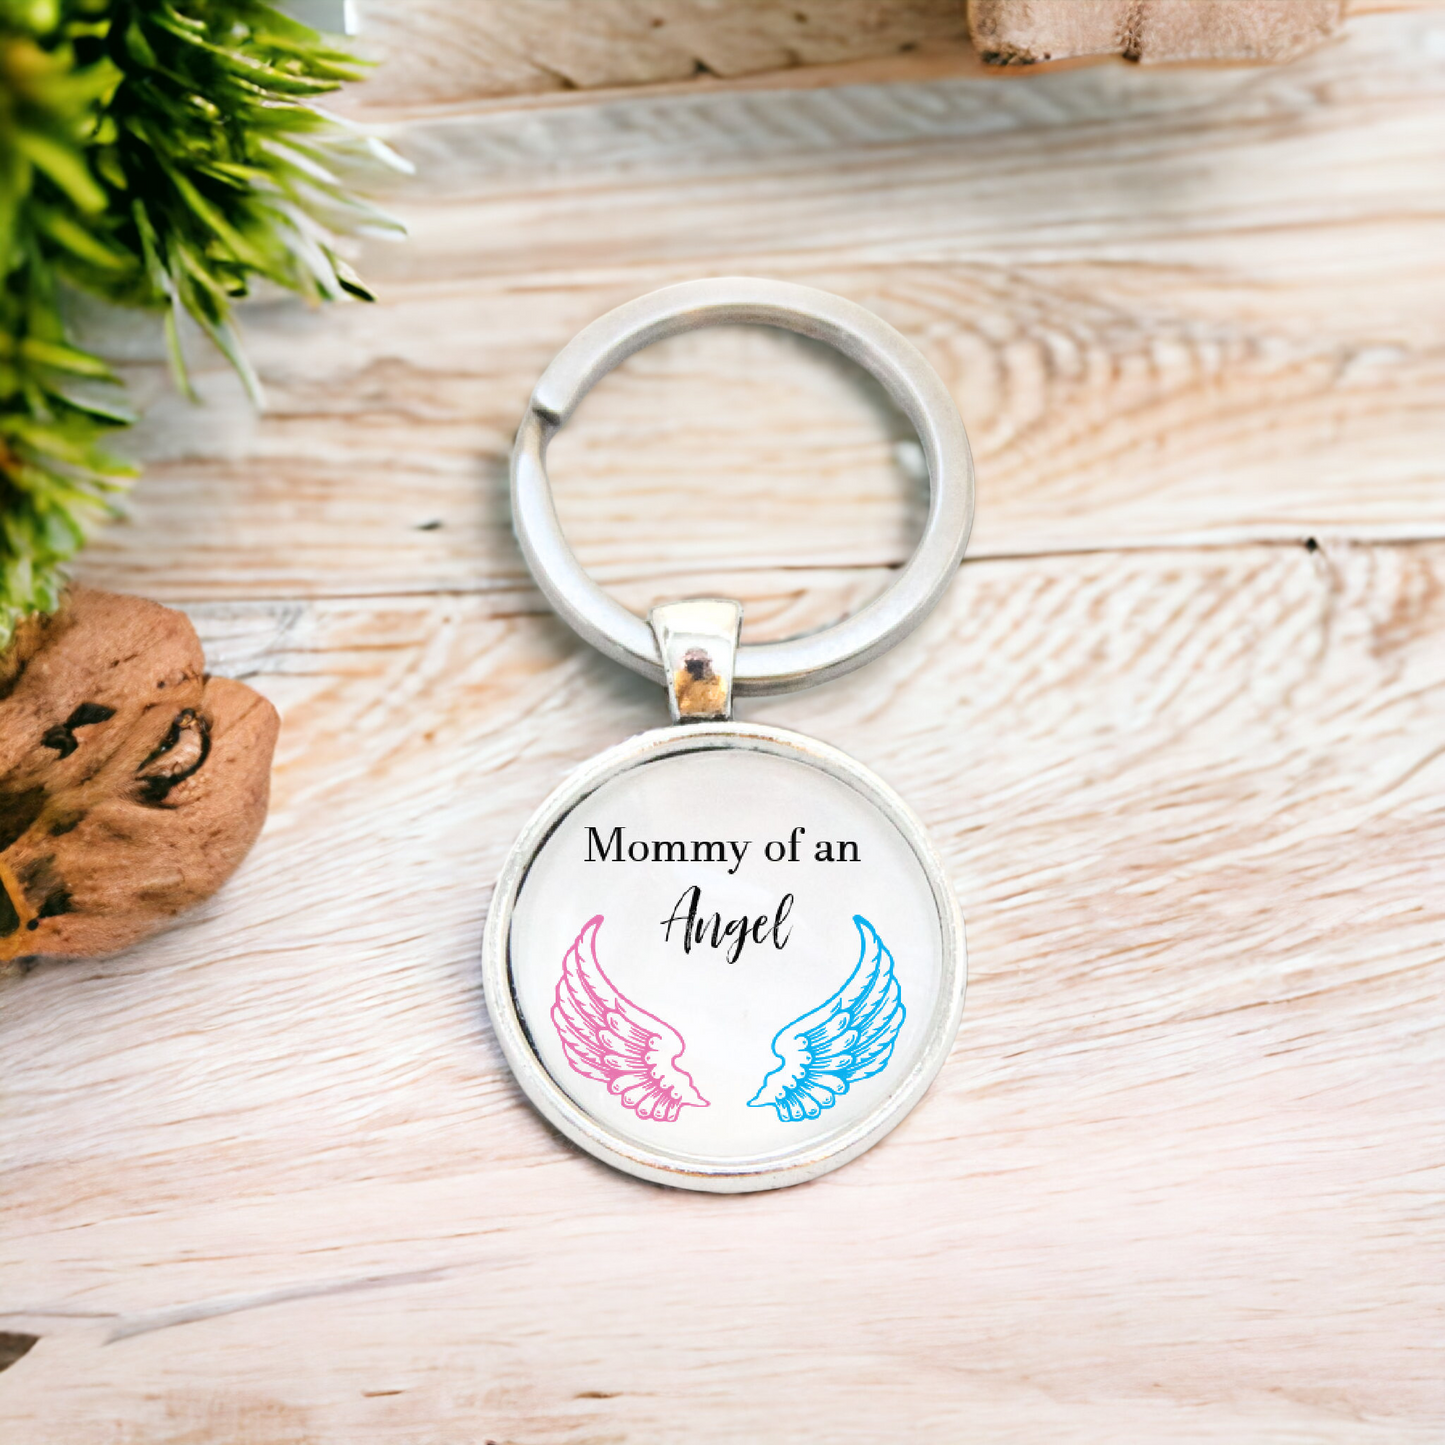 Mommy of an Angel Keychain